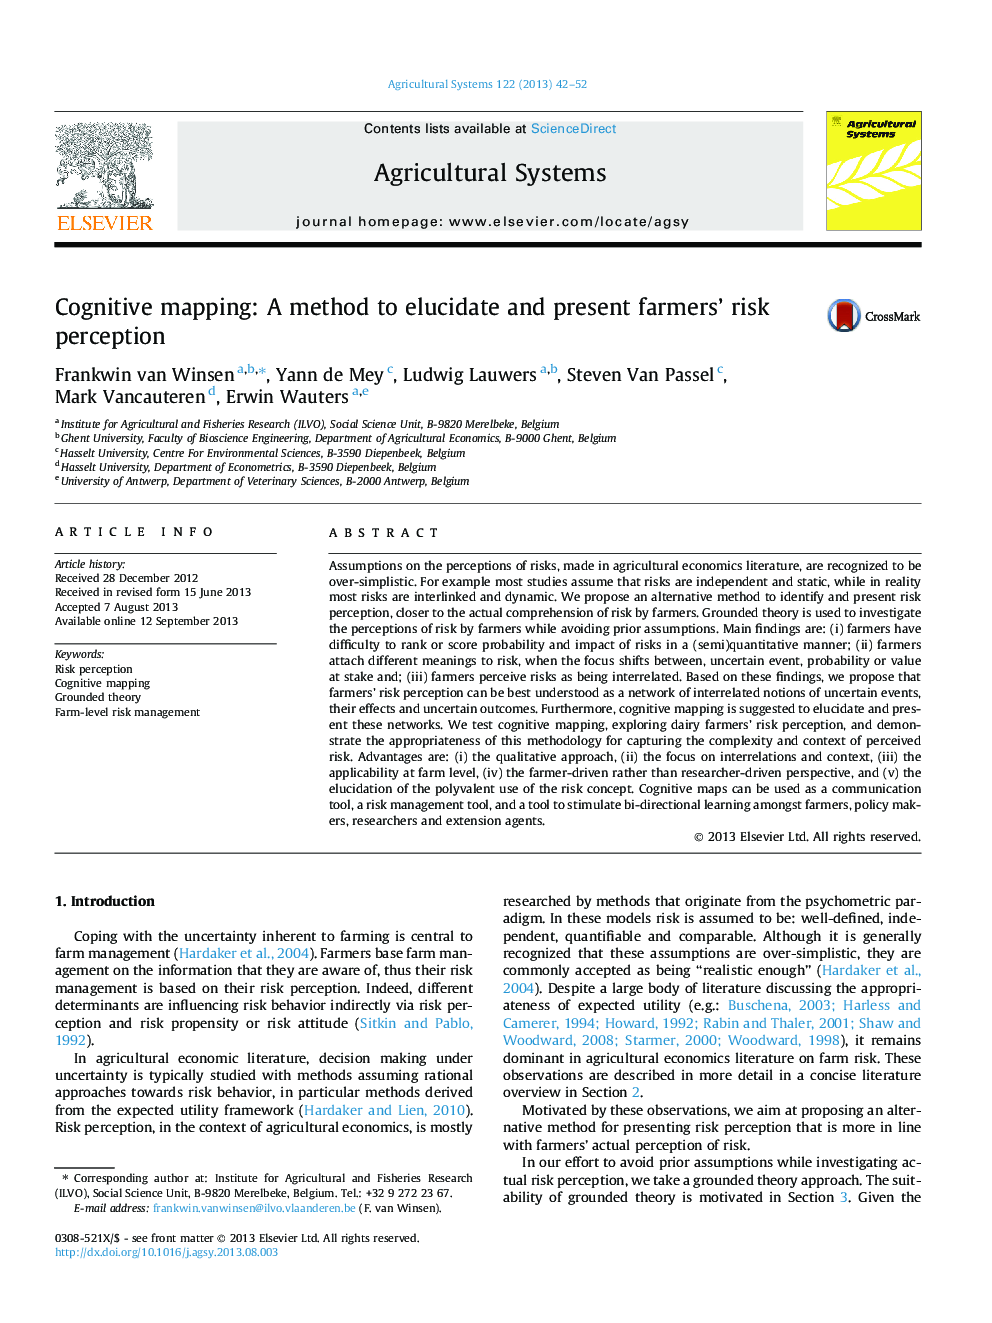 Cognitive mapping: A method to elucidate and present farmers’ risk perception